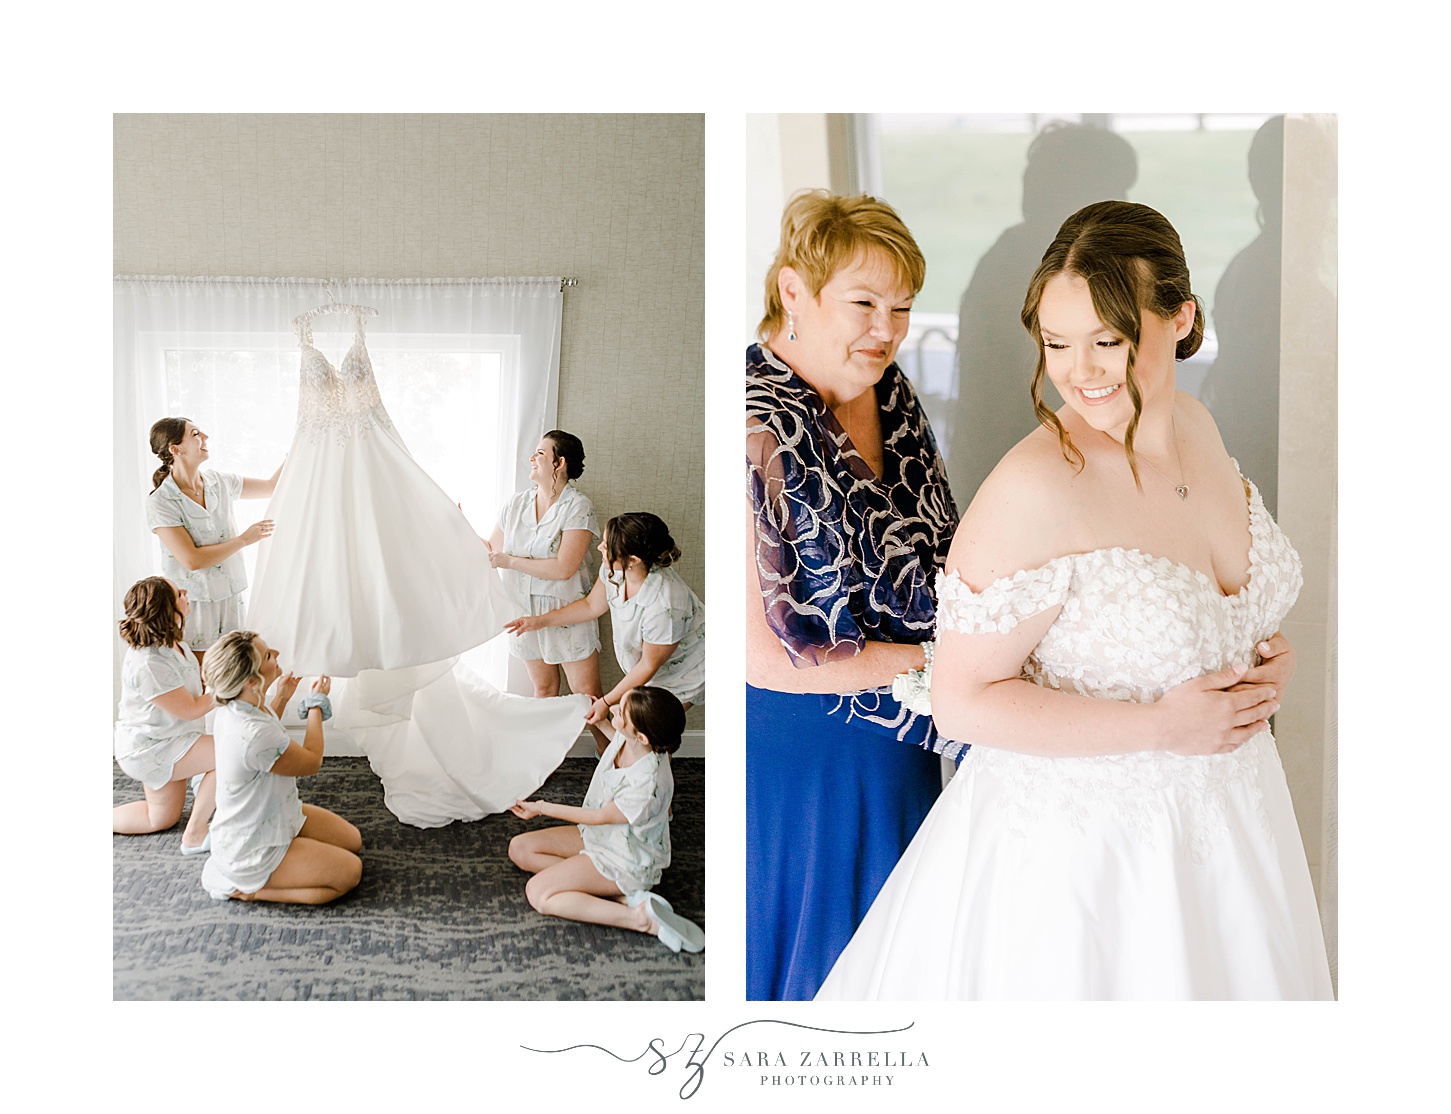 mother in blue dress helps bride into wedding gown